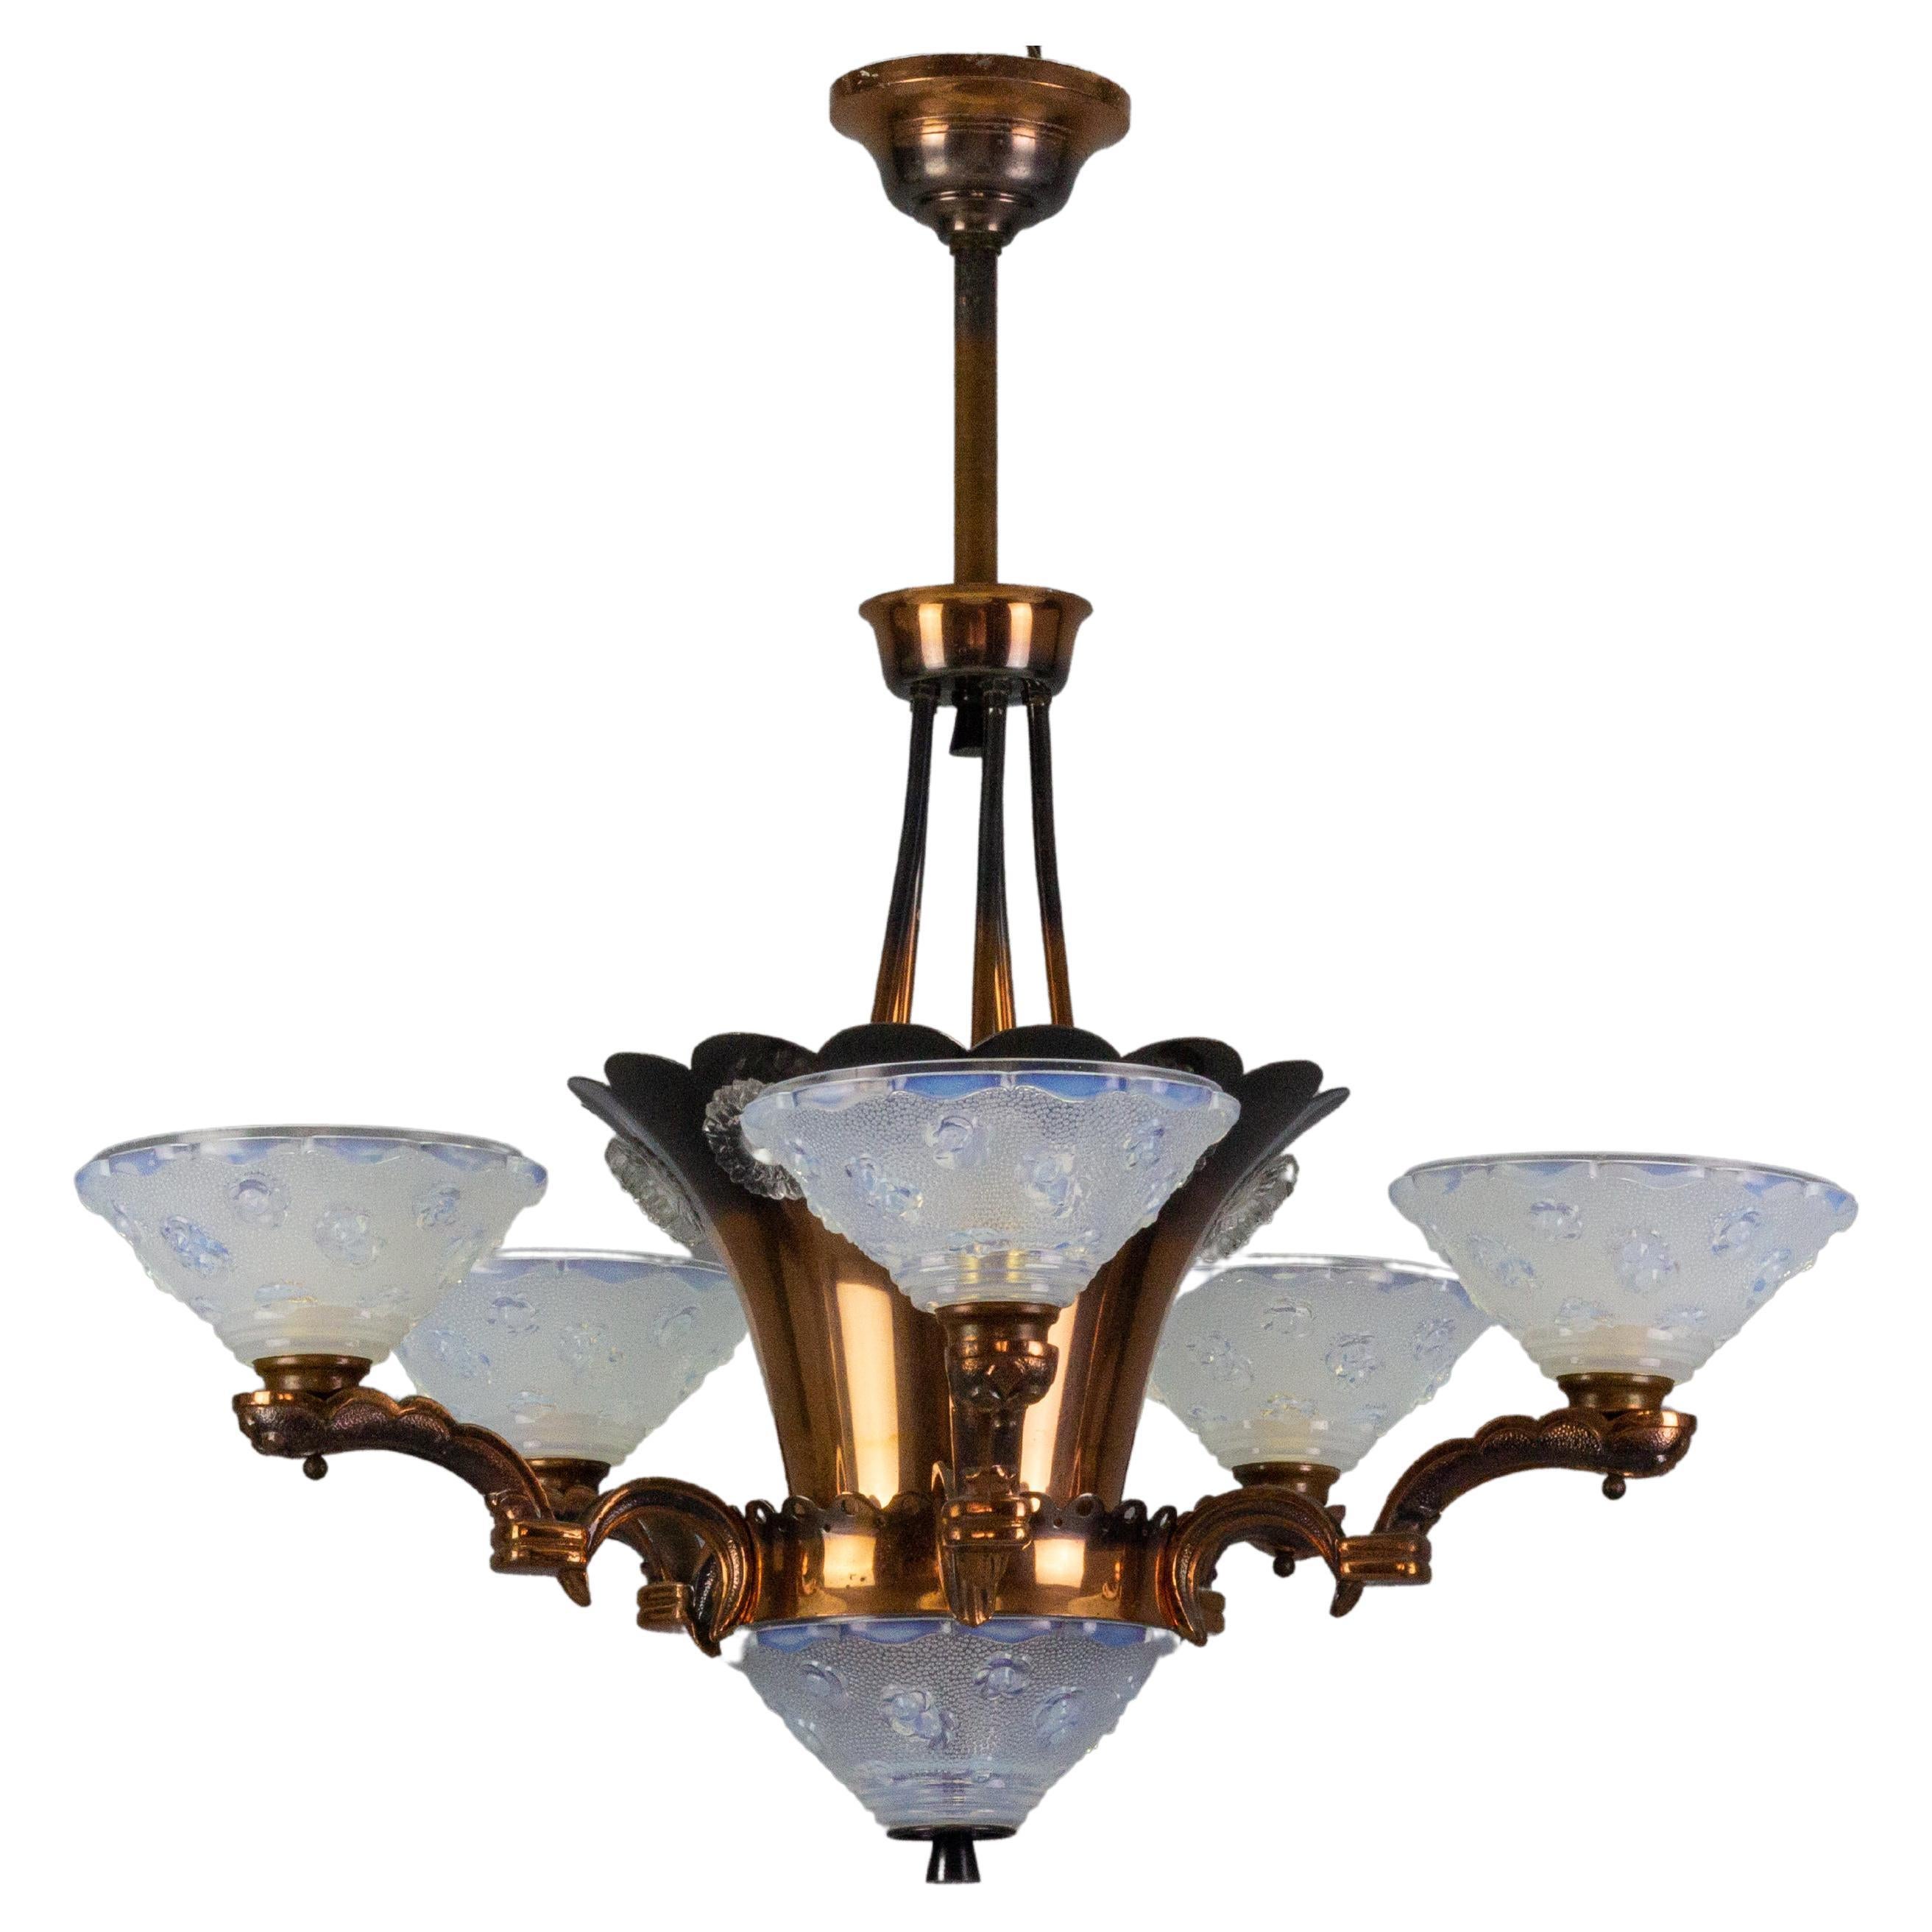 French Art Deco Copper and Opalescent Glass Floral Chandelier by Ezan, 1930s